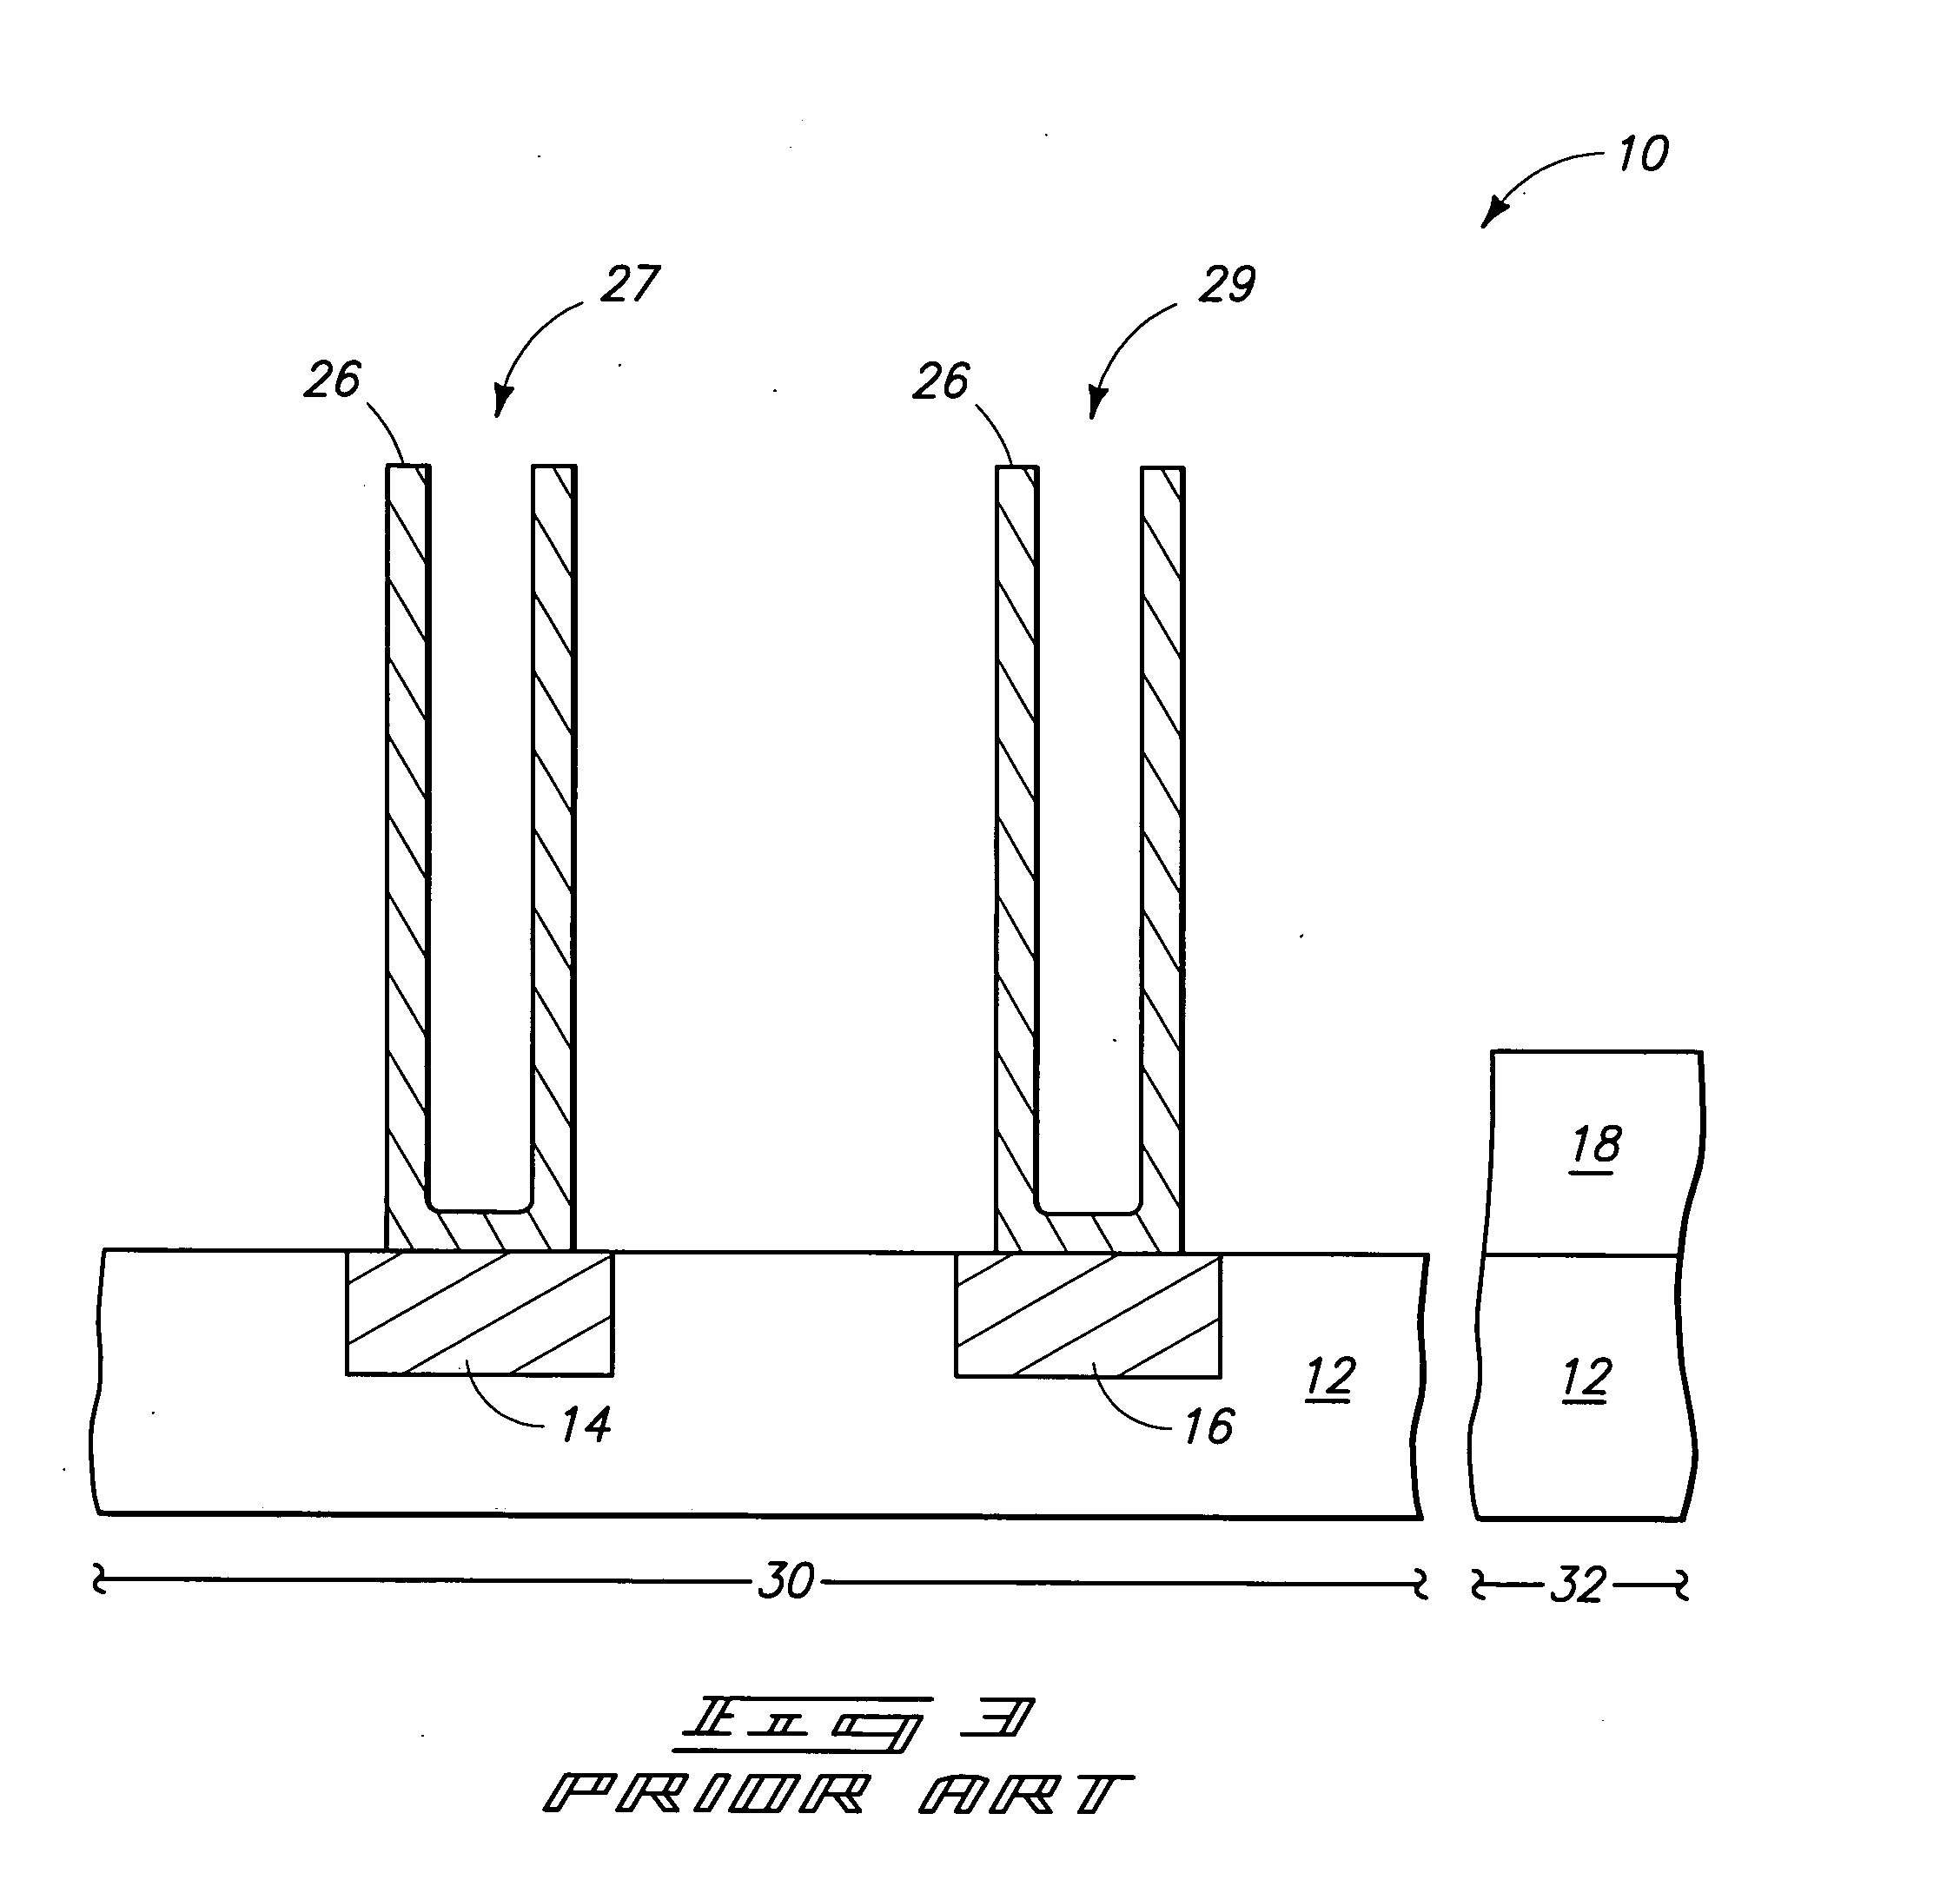 Methods of removing metal-containing materials